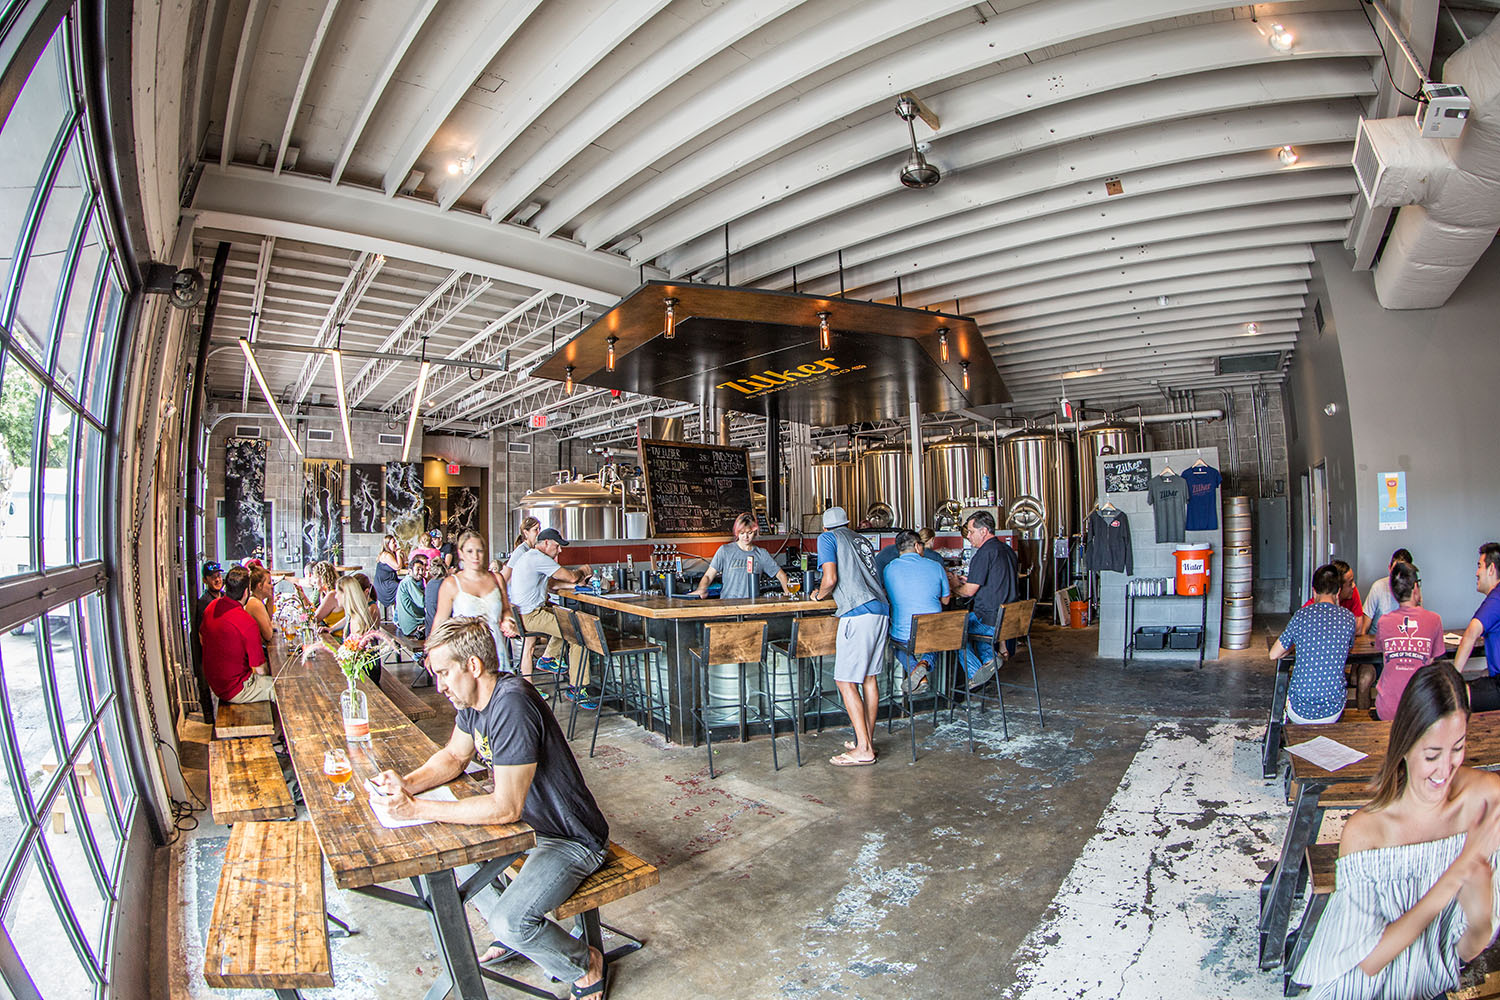 Tasting room at Zilker Brewing on East 6th. Photo: Will Taylor - LostinAustin.org